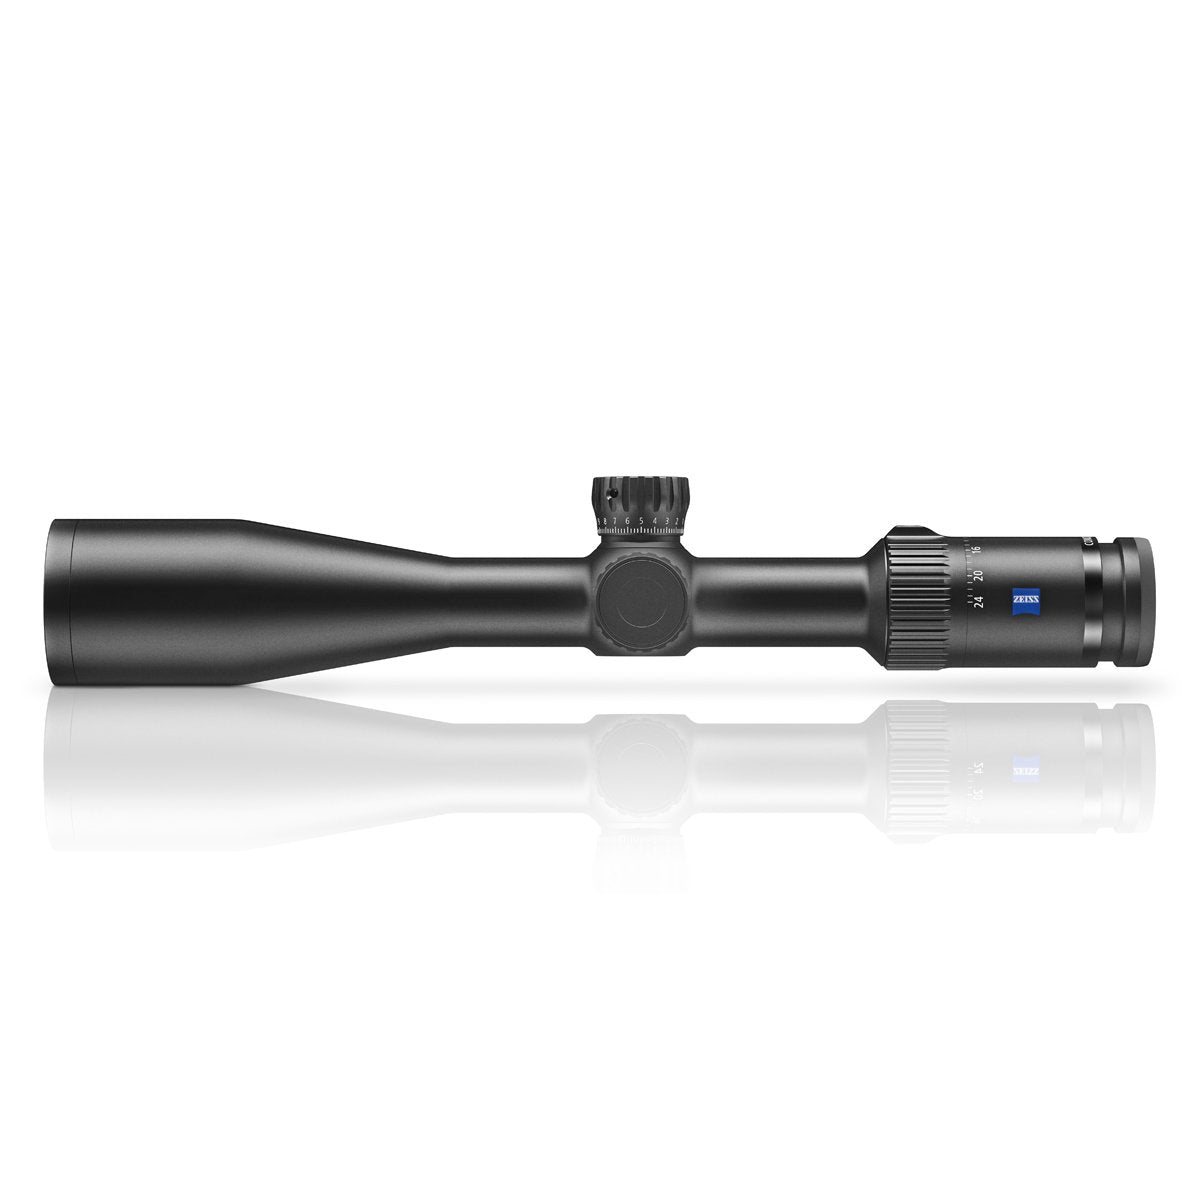 Zeiss Conquest V4 6-24x50 ZMOA-1 #93 Reticle Riflescope in Zeiss Conquest V4 6-24x50 Riflescope by Zeiss | Optics - goHUNT Shop by GOHUNT | Zeiss - GOHUNT Shop